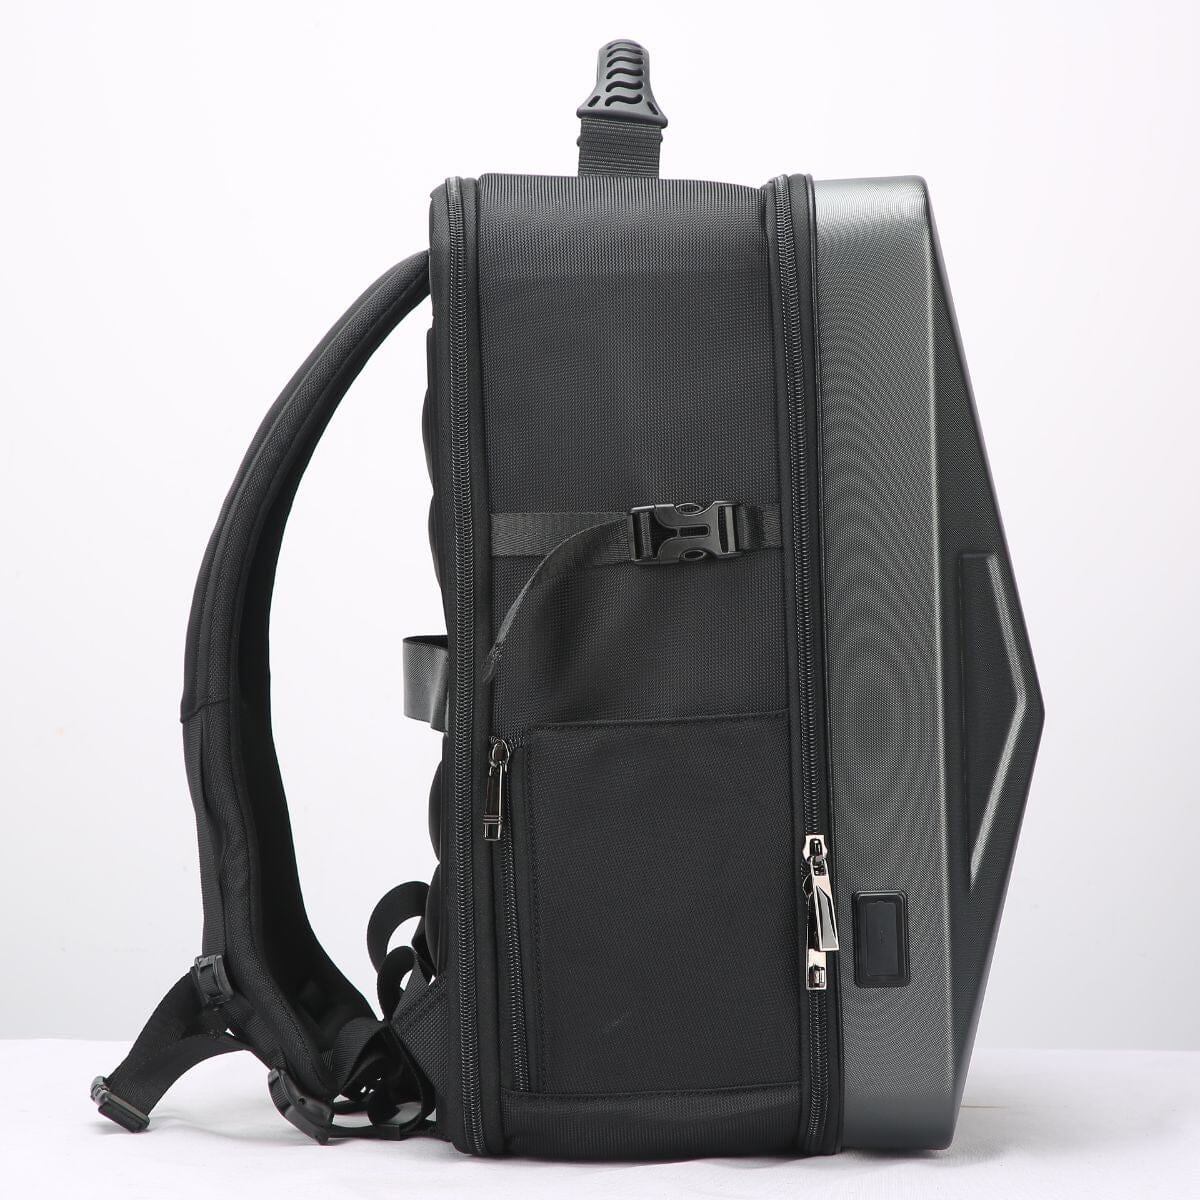 Anti-Theft Laptop Backpack w/ USB Charging Port and Small Sling